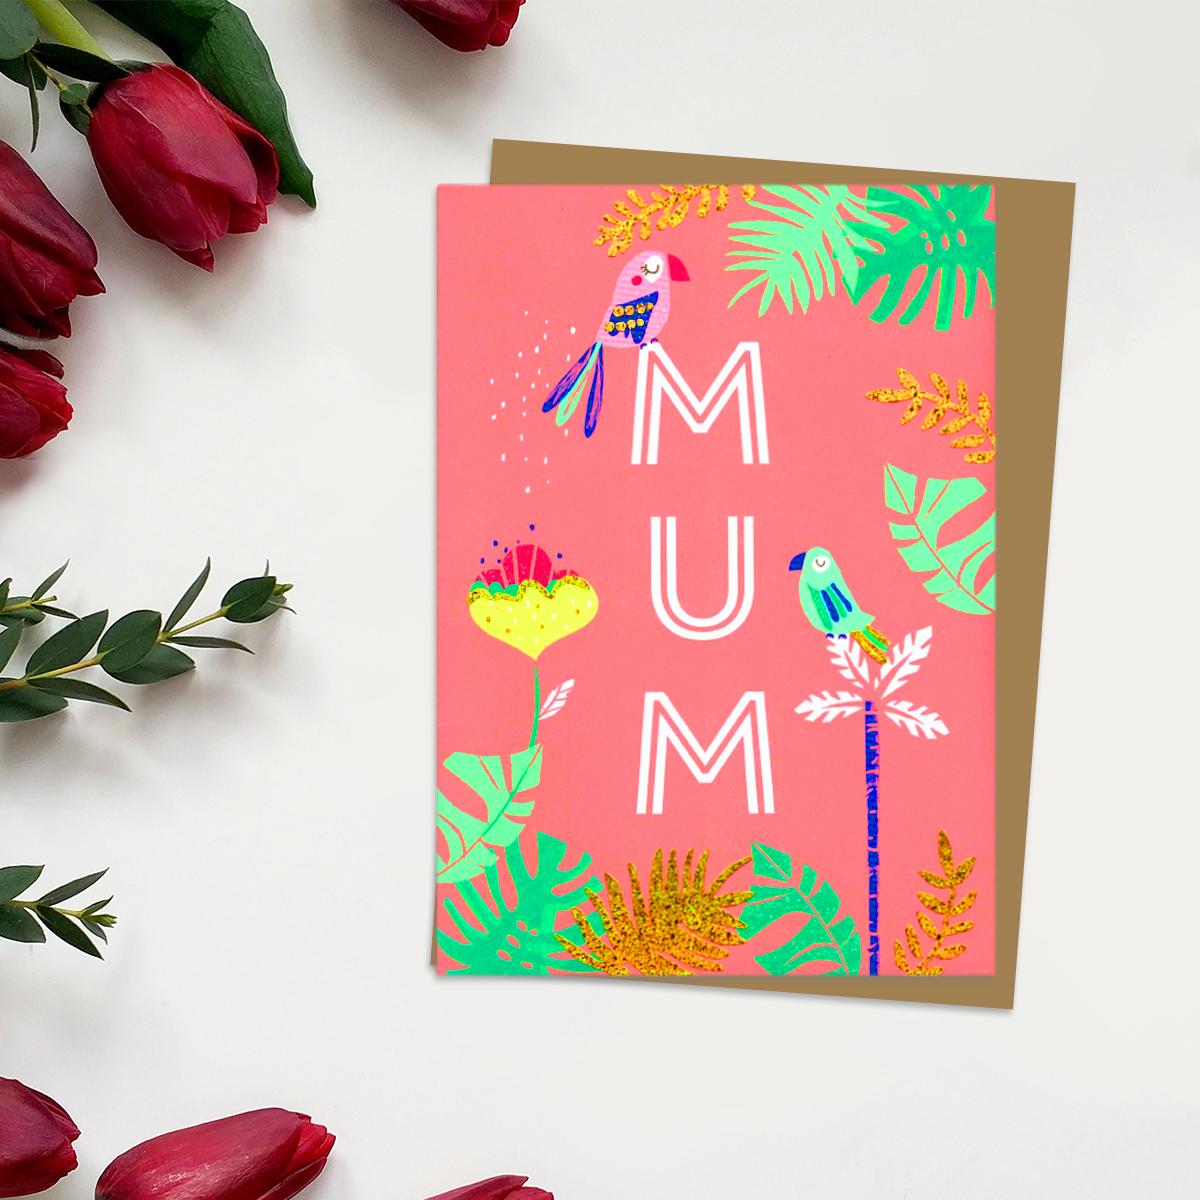 ' Mum' Mother's Day Card In Neon orange Showing A Parrot sitting On Top Of the Letters Of 'Mum'. With Added Gold Foil Detail And Brown Envelope